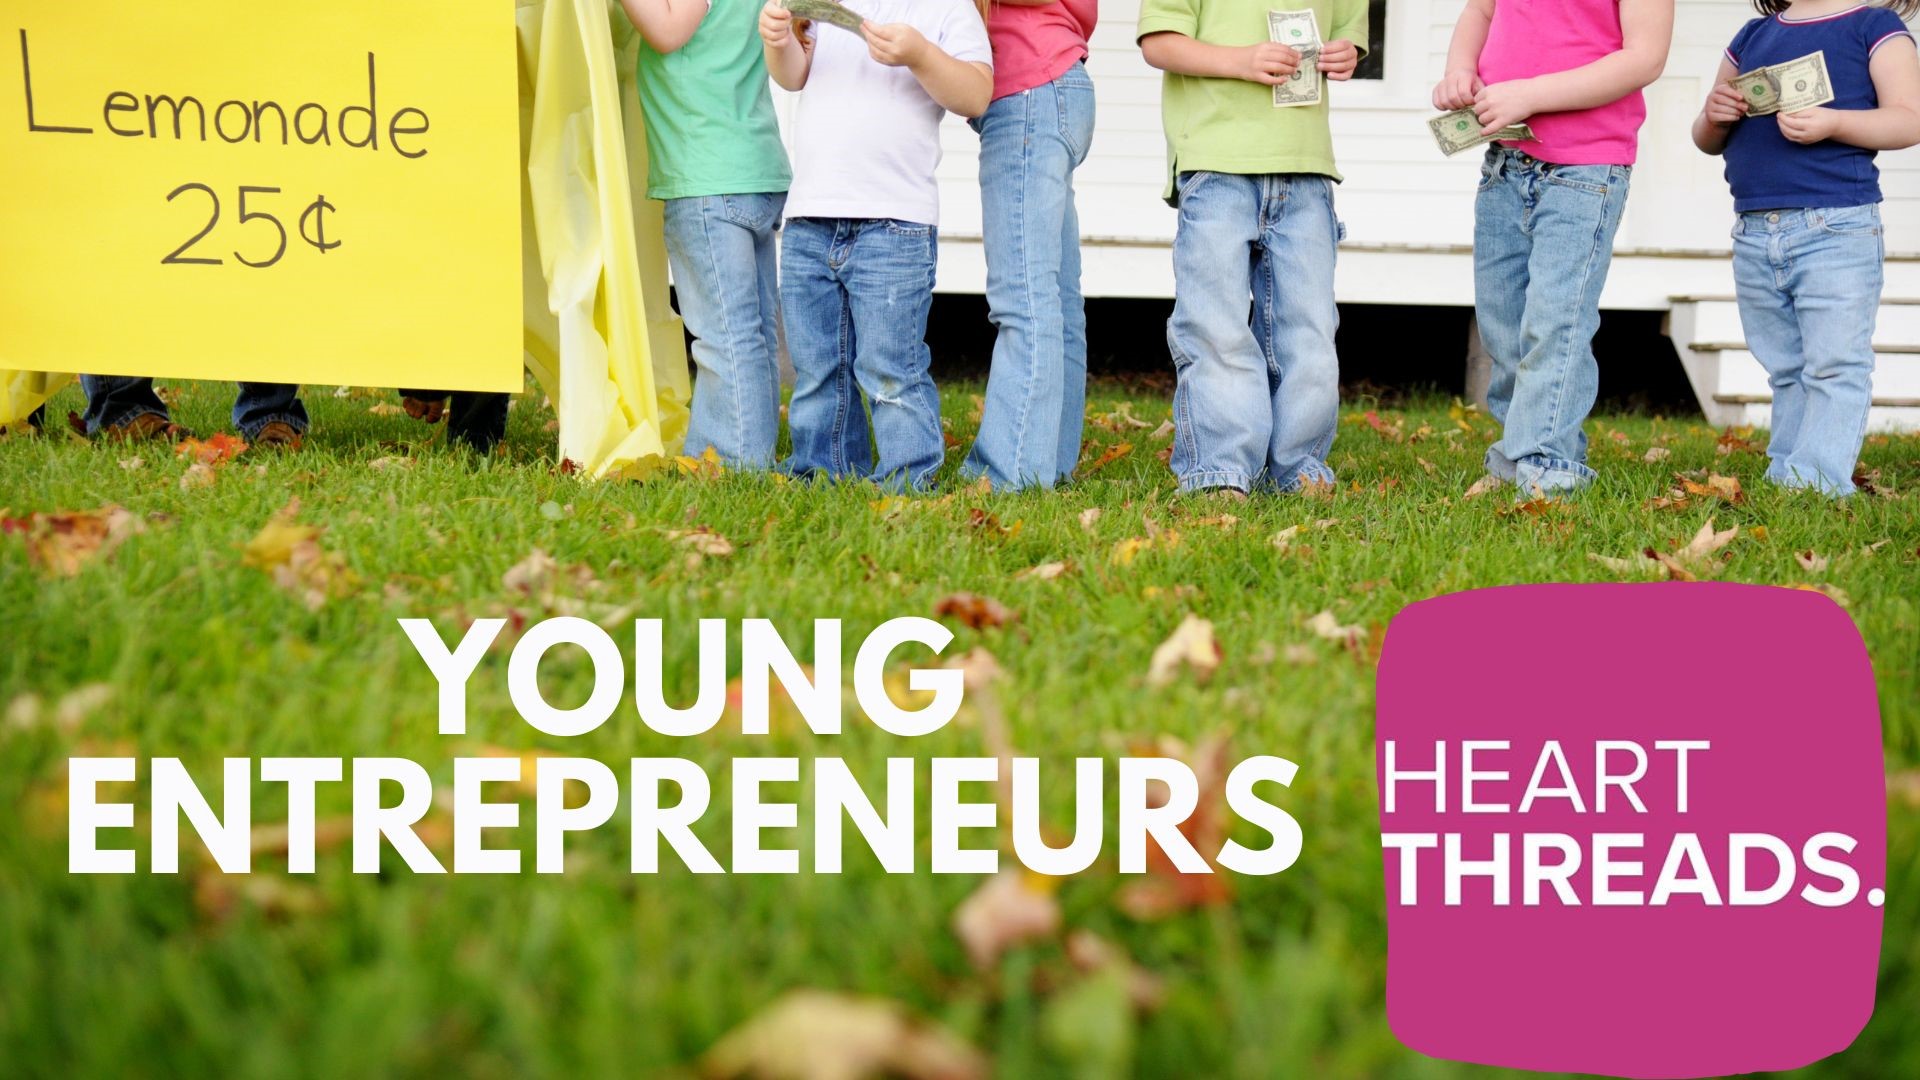 Heartwarming stories of young entrepreneurs starting businesses to give back to their communities.